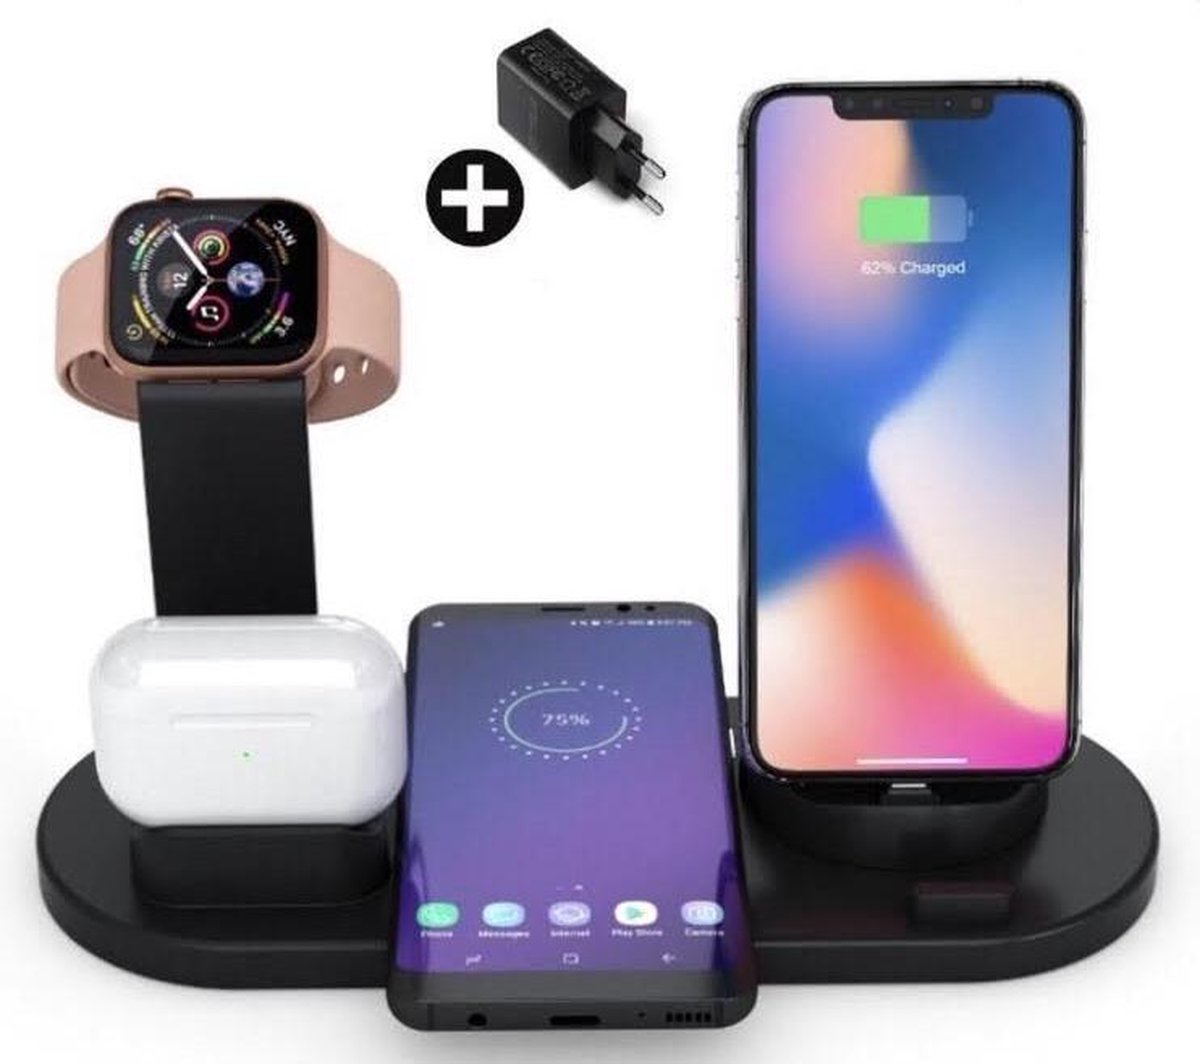 J.A.G. Chargers® 4-in-1 Draadloze oplader Iphone – Inclusief snellader- Wireless charger for iPhone, iWatch en AirpodsPro - ALLEEN NOG IN WIT VERKRIJGBAAR - Oplaadstation Apple - Snellader iphone - Docking station